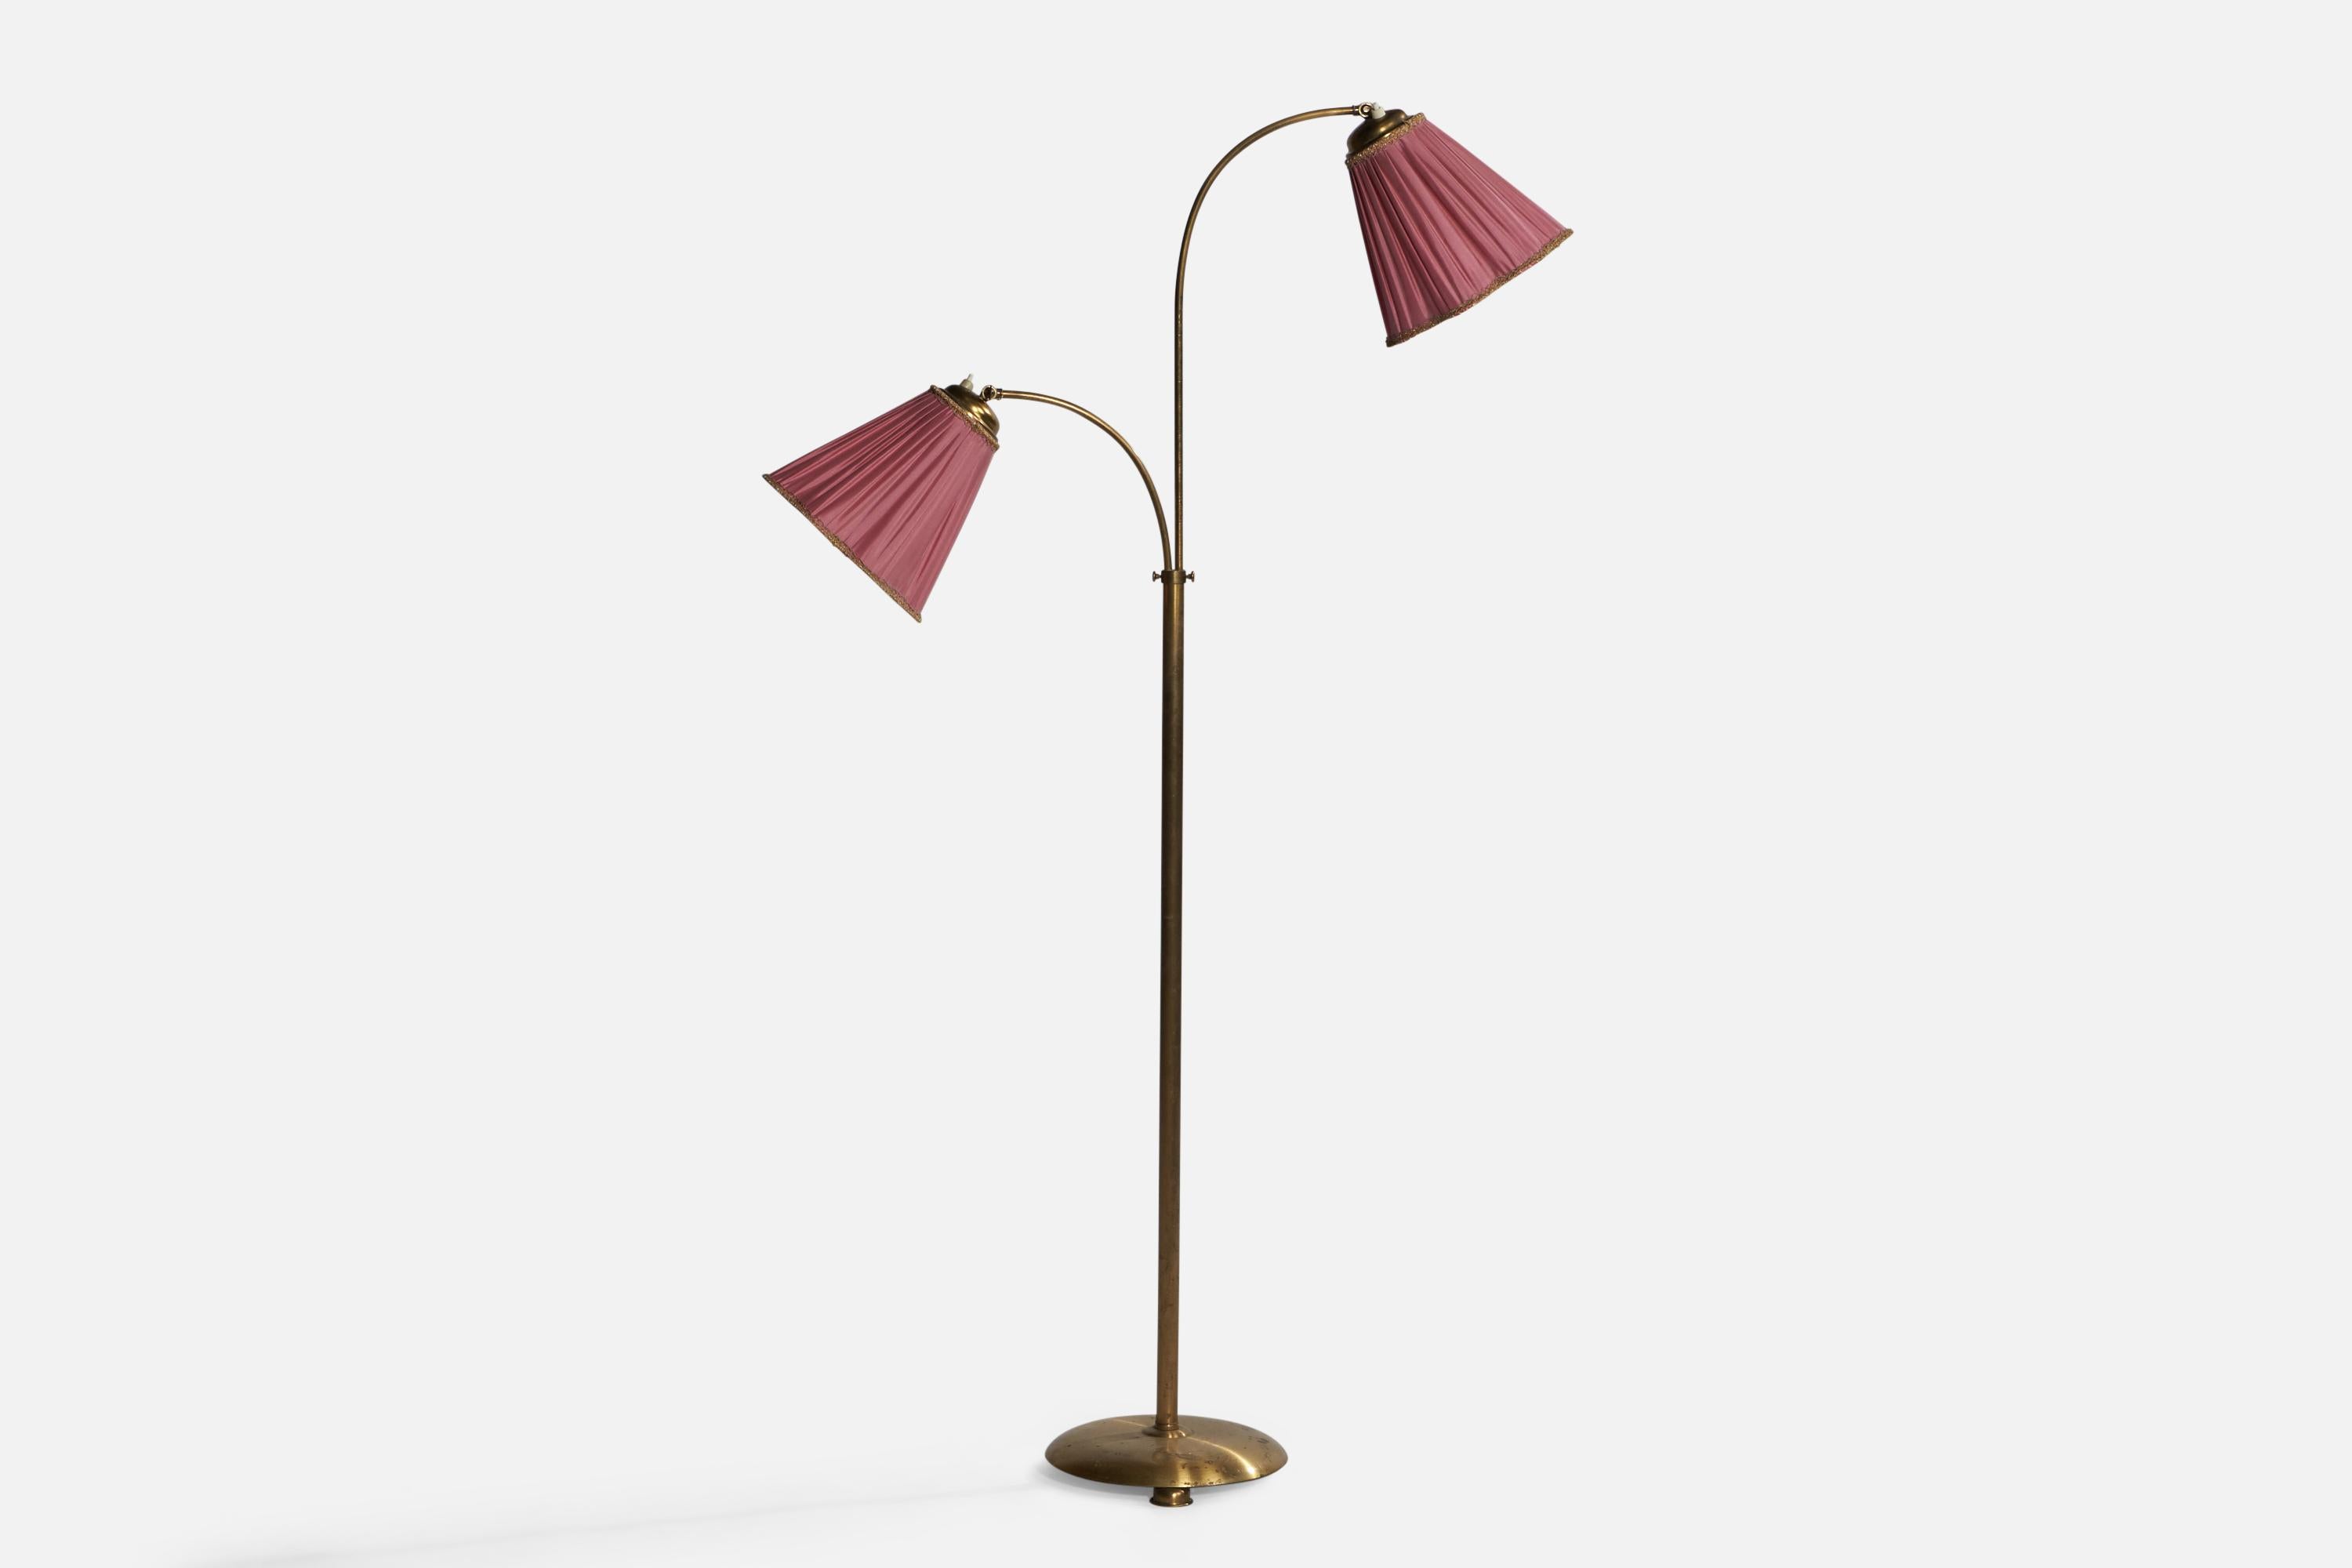 An adjustable two-armed brass and purple fabric floor lamp designed and produced in Sweden, 1940s.

Overall Dimensions (inches): 62.25” H x 36” W 11.25” D. Stated dimensions include shades.
Dimensions vary based on position of lights.
Bulb